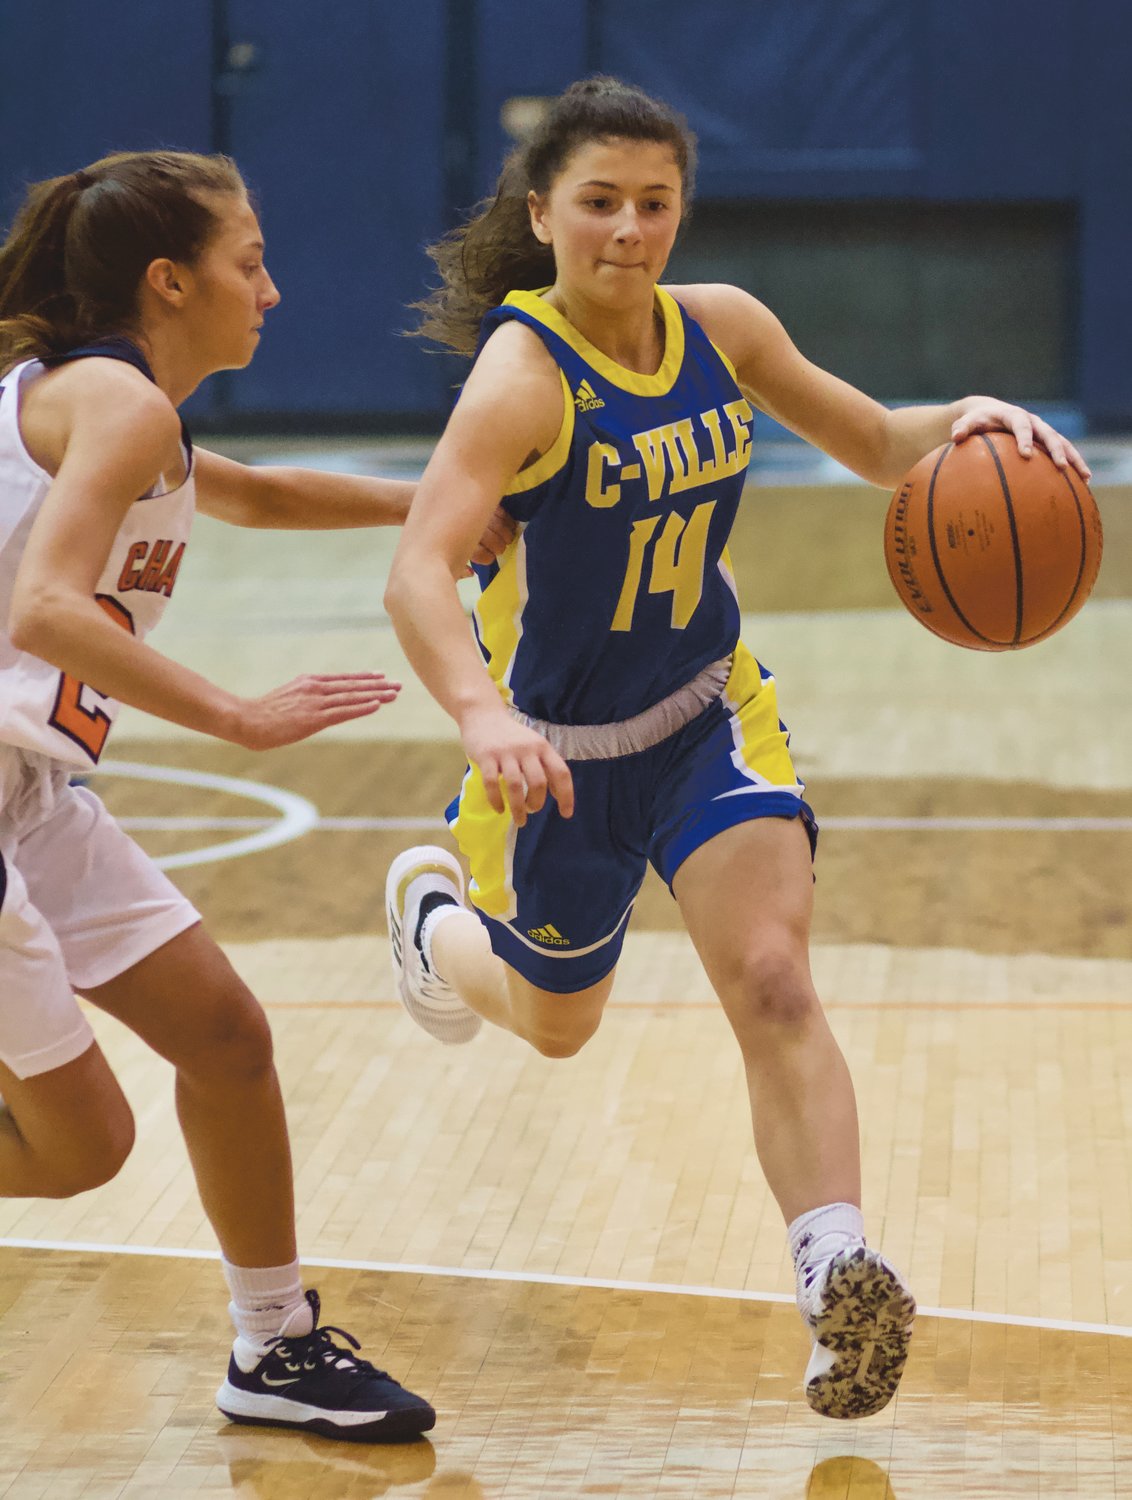 Crawfordsville's Shea Williamson drives past North Montgomery's Maddie Moseley in a game earlier this season. The Athenians will play Danville in the sectional, while the Chargers will open with Frankfort.